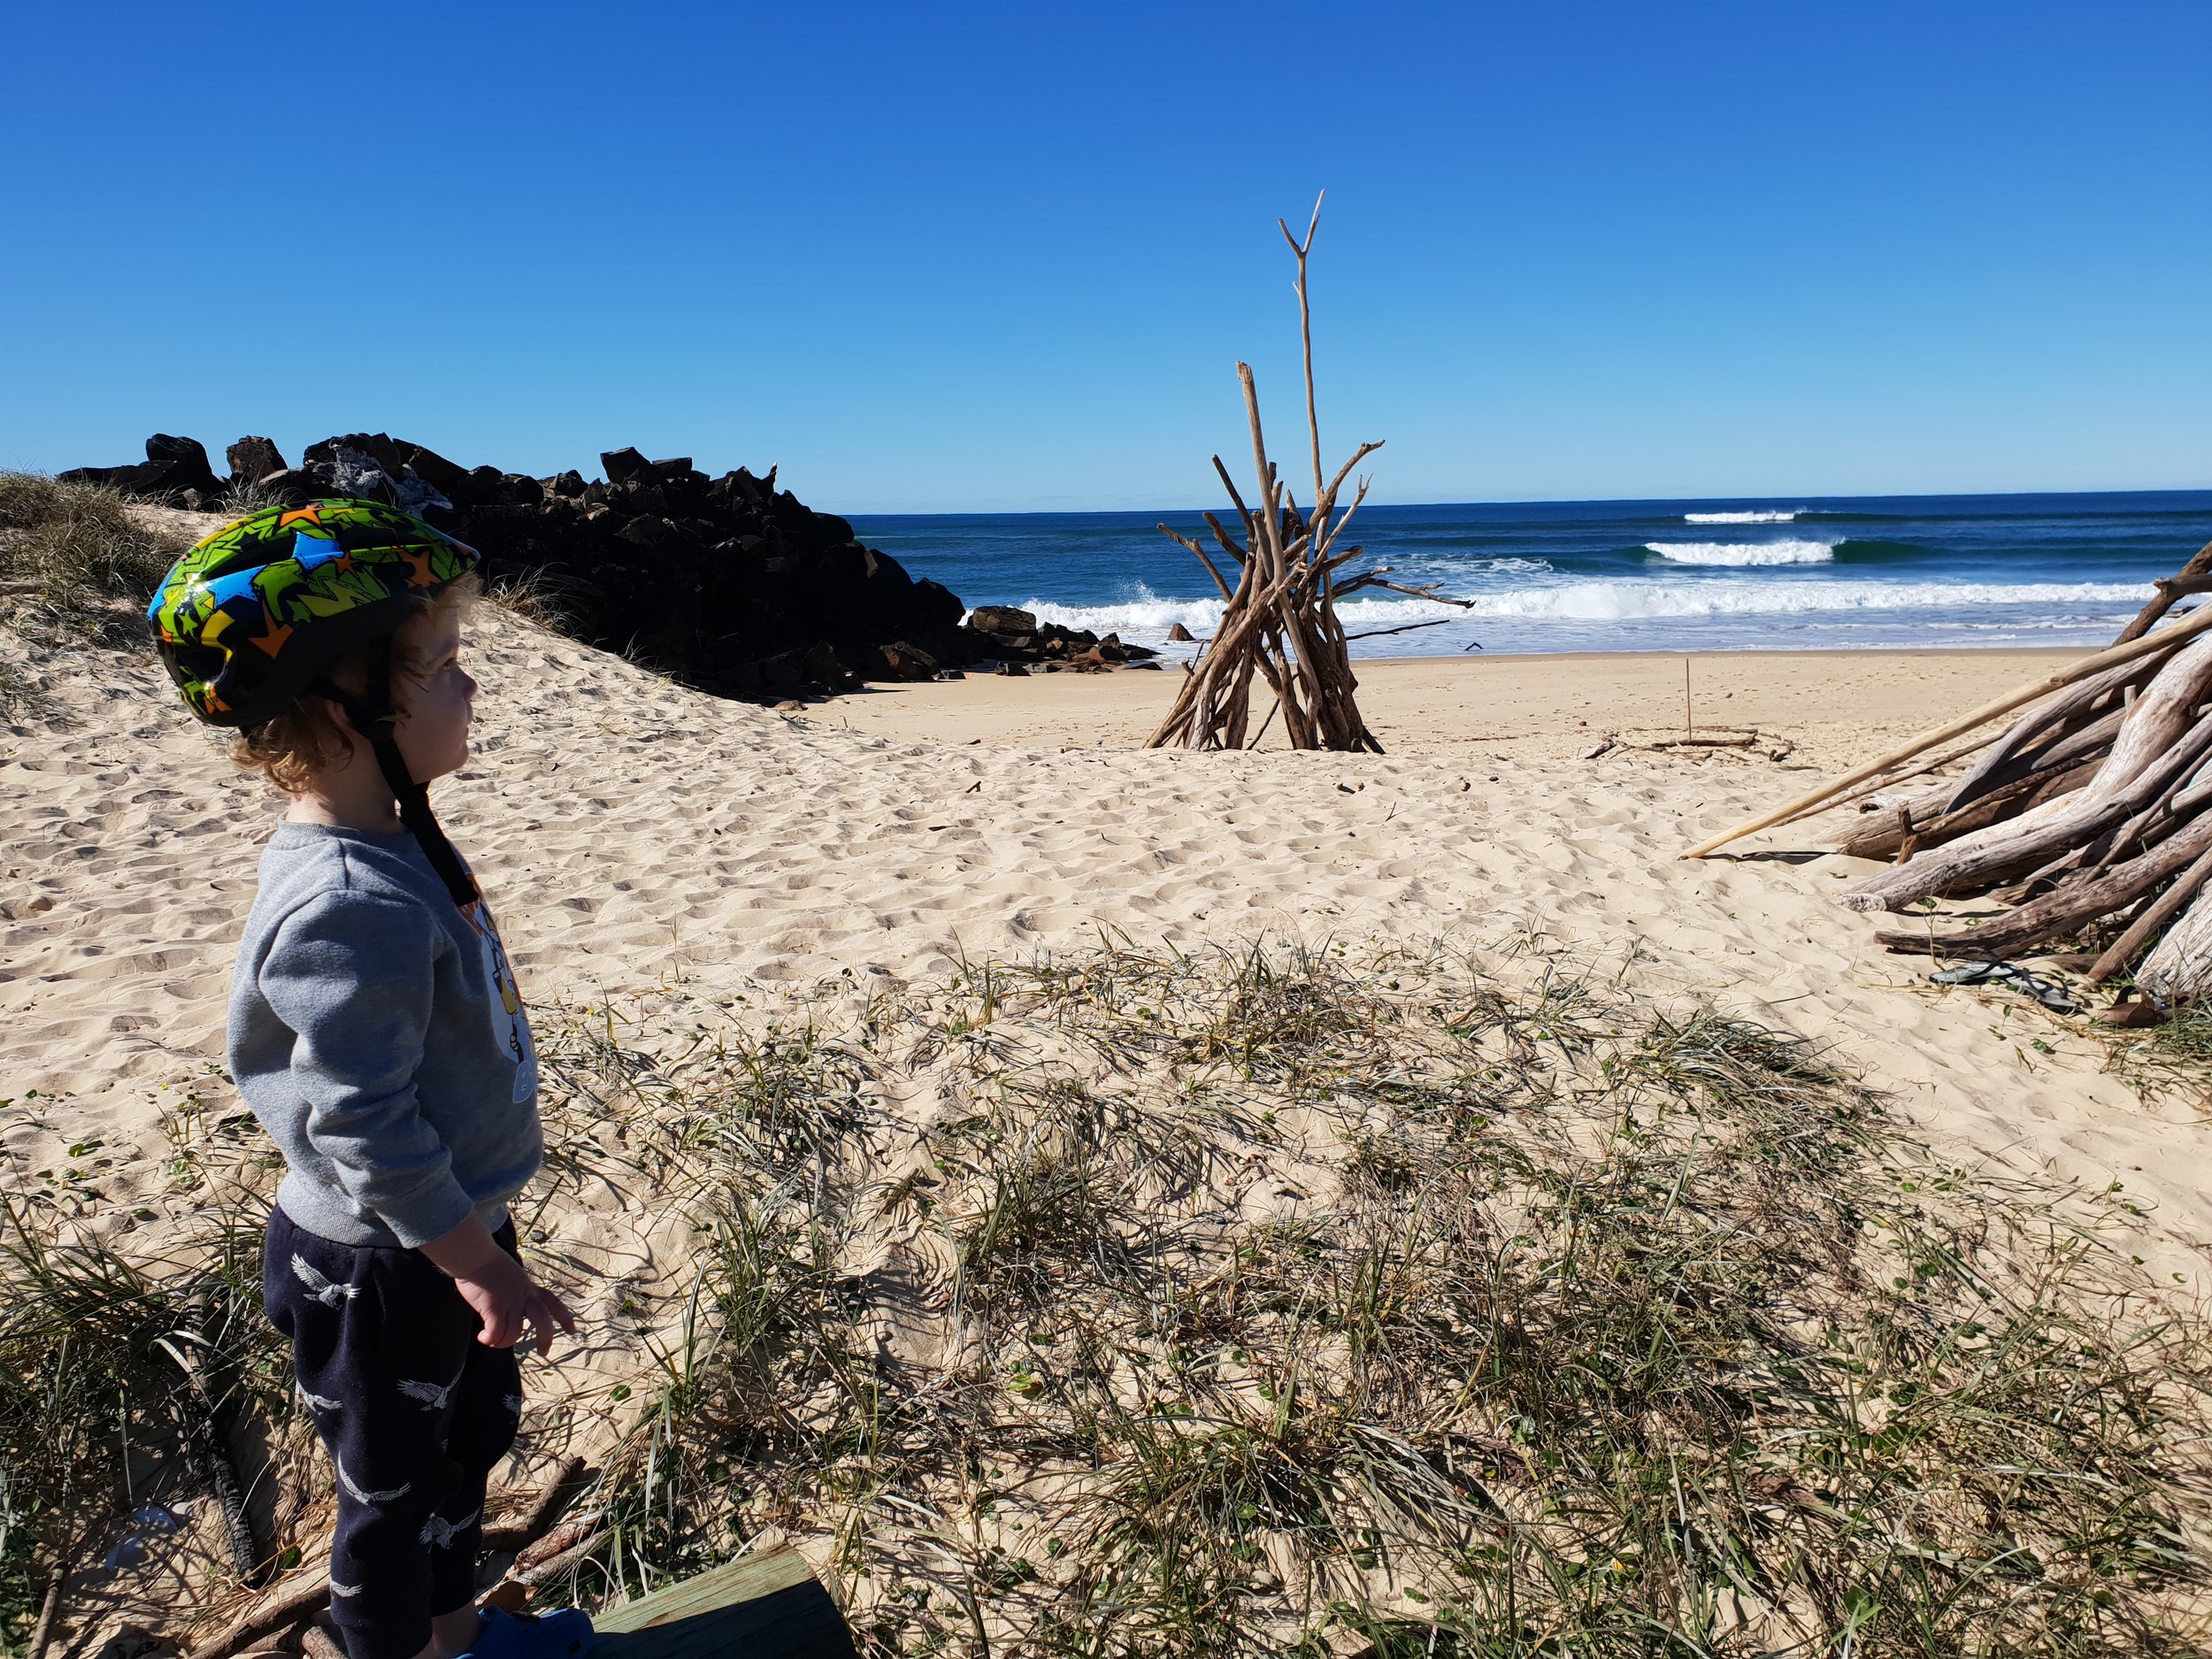 Exploring a new beach with driftwood huts